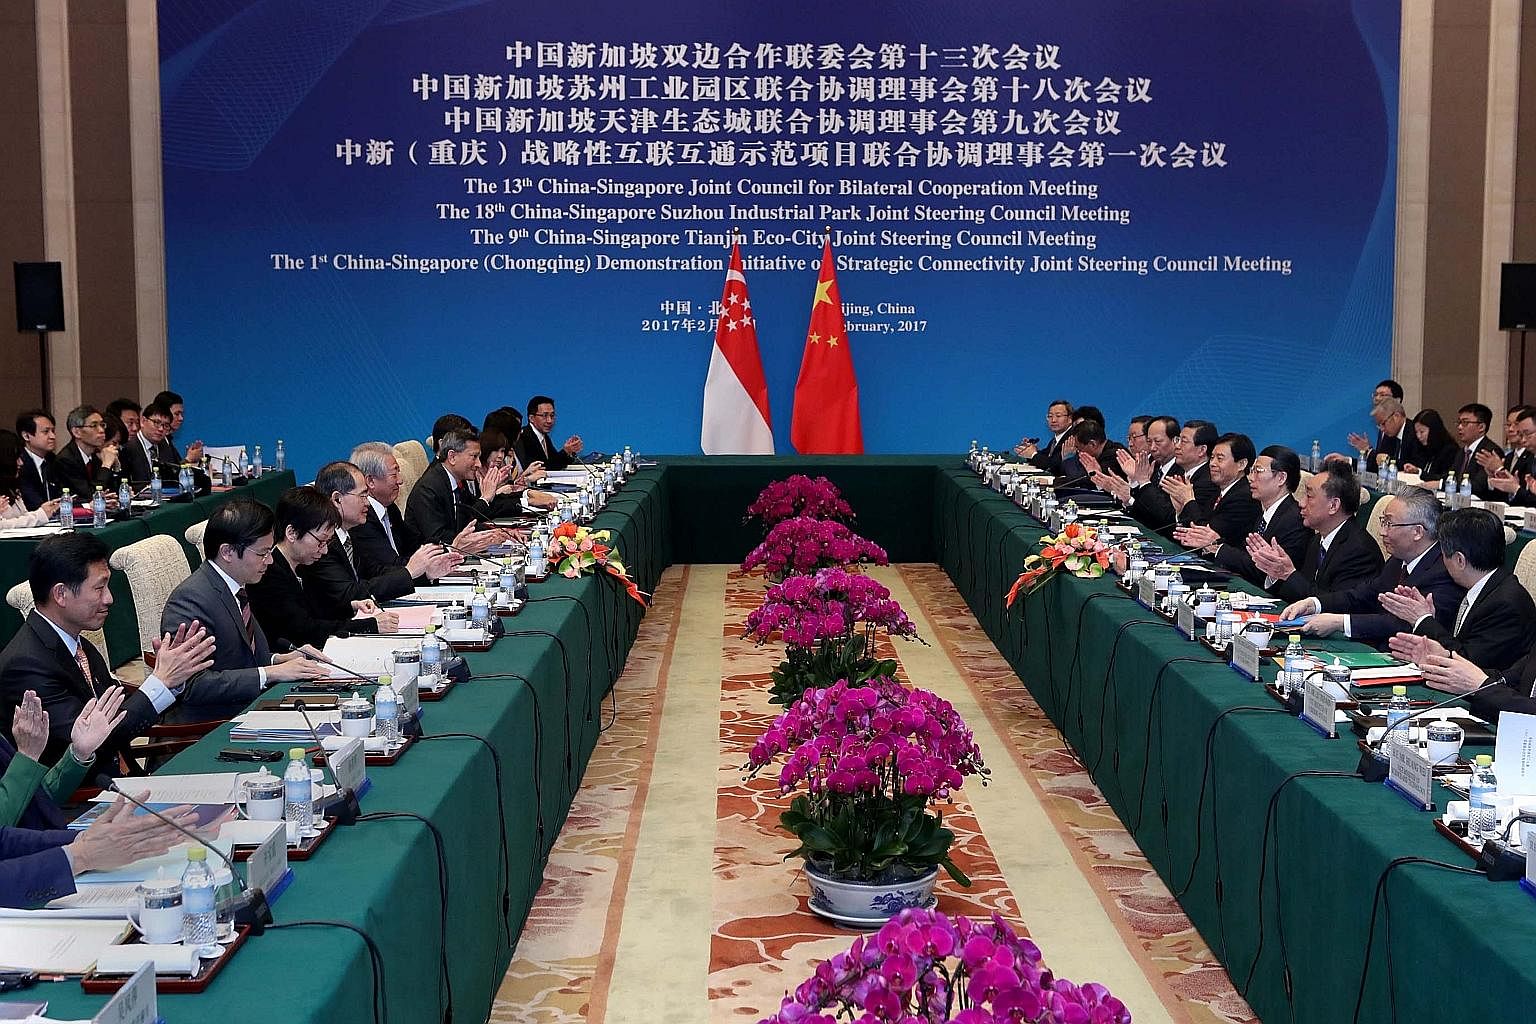 The Singapore and Chinese delegations attending the 13th Joint Council for Bilateral Cooperation (JCBC) meeting in Beijing last year. Singapore is hosting the 14th meeting this week. The JCBC is the "premier platform to exchange ideas, discuss bilate